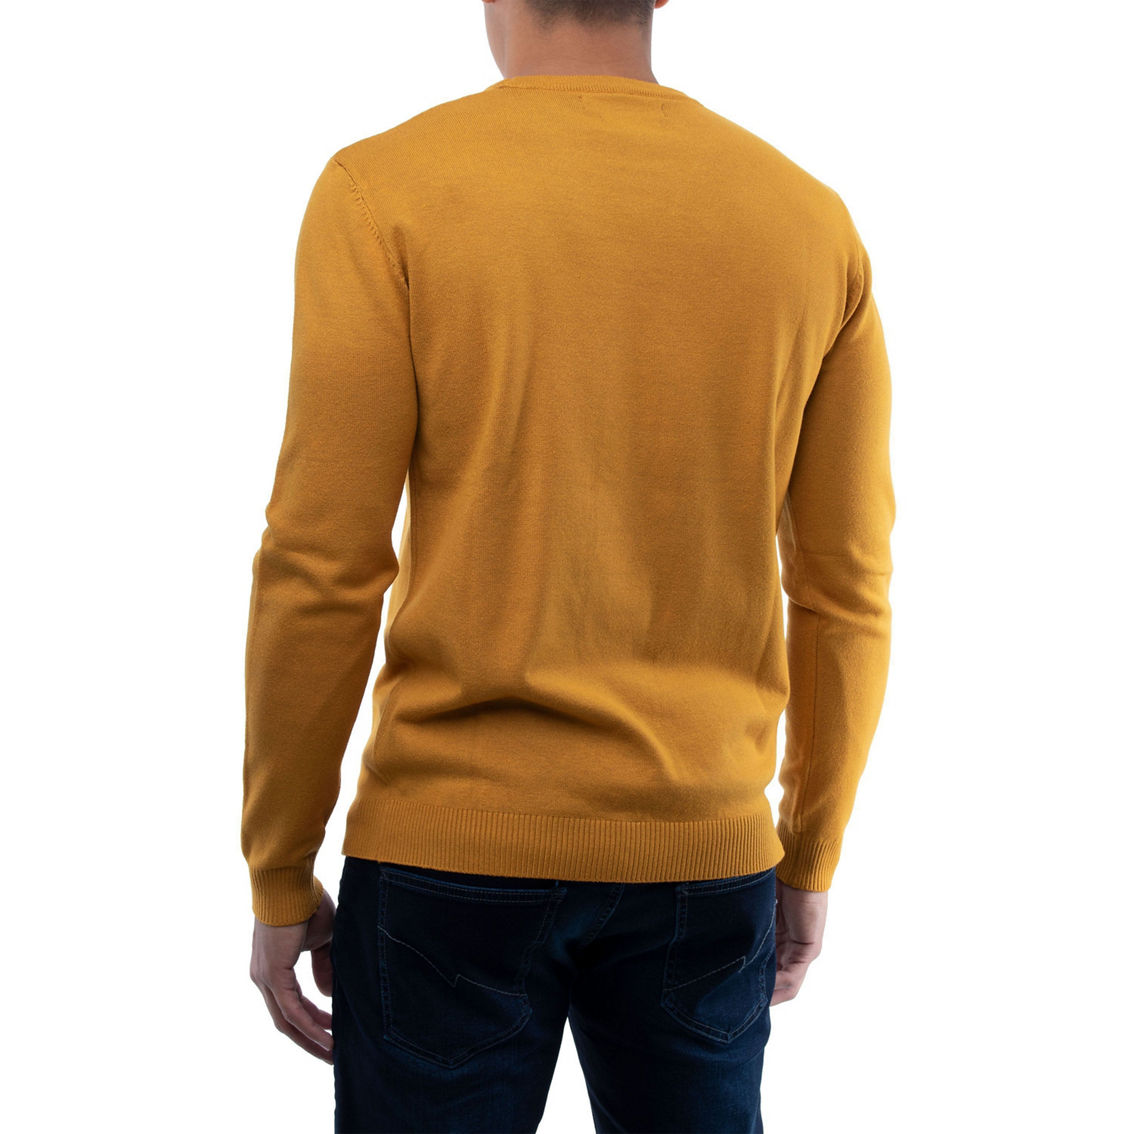 Men's Slim Fit Midweight Pullover Crew Neck Sweater - Image 2 of 4